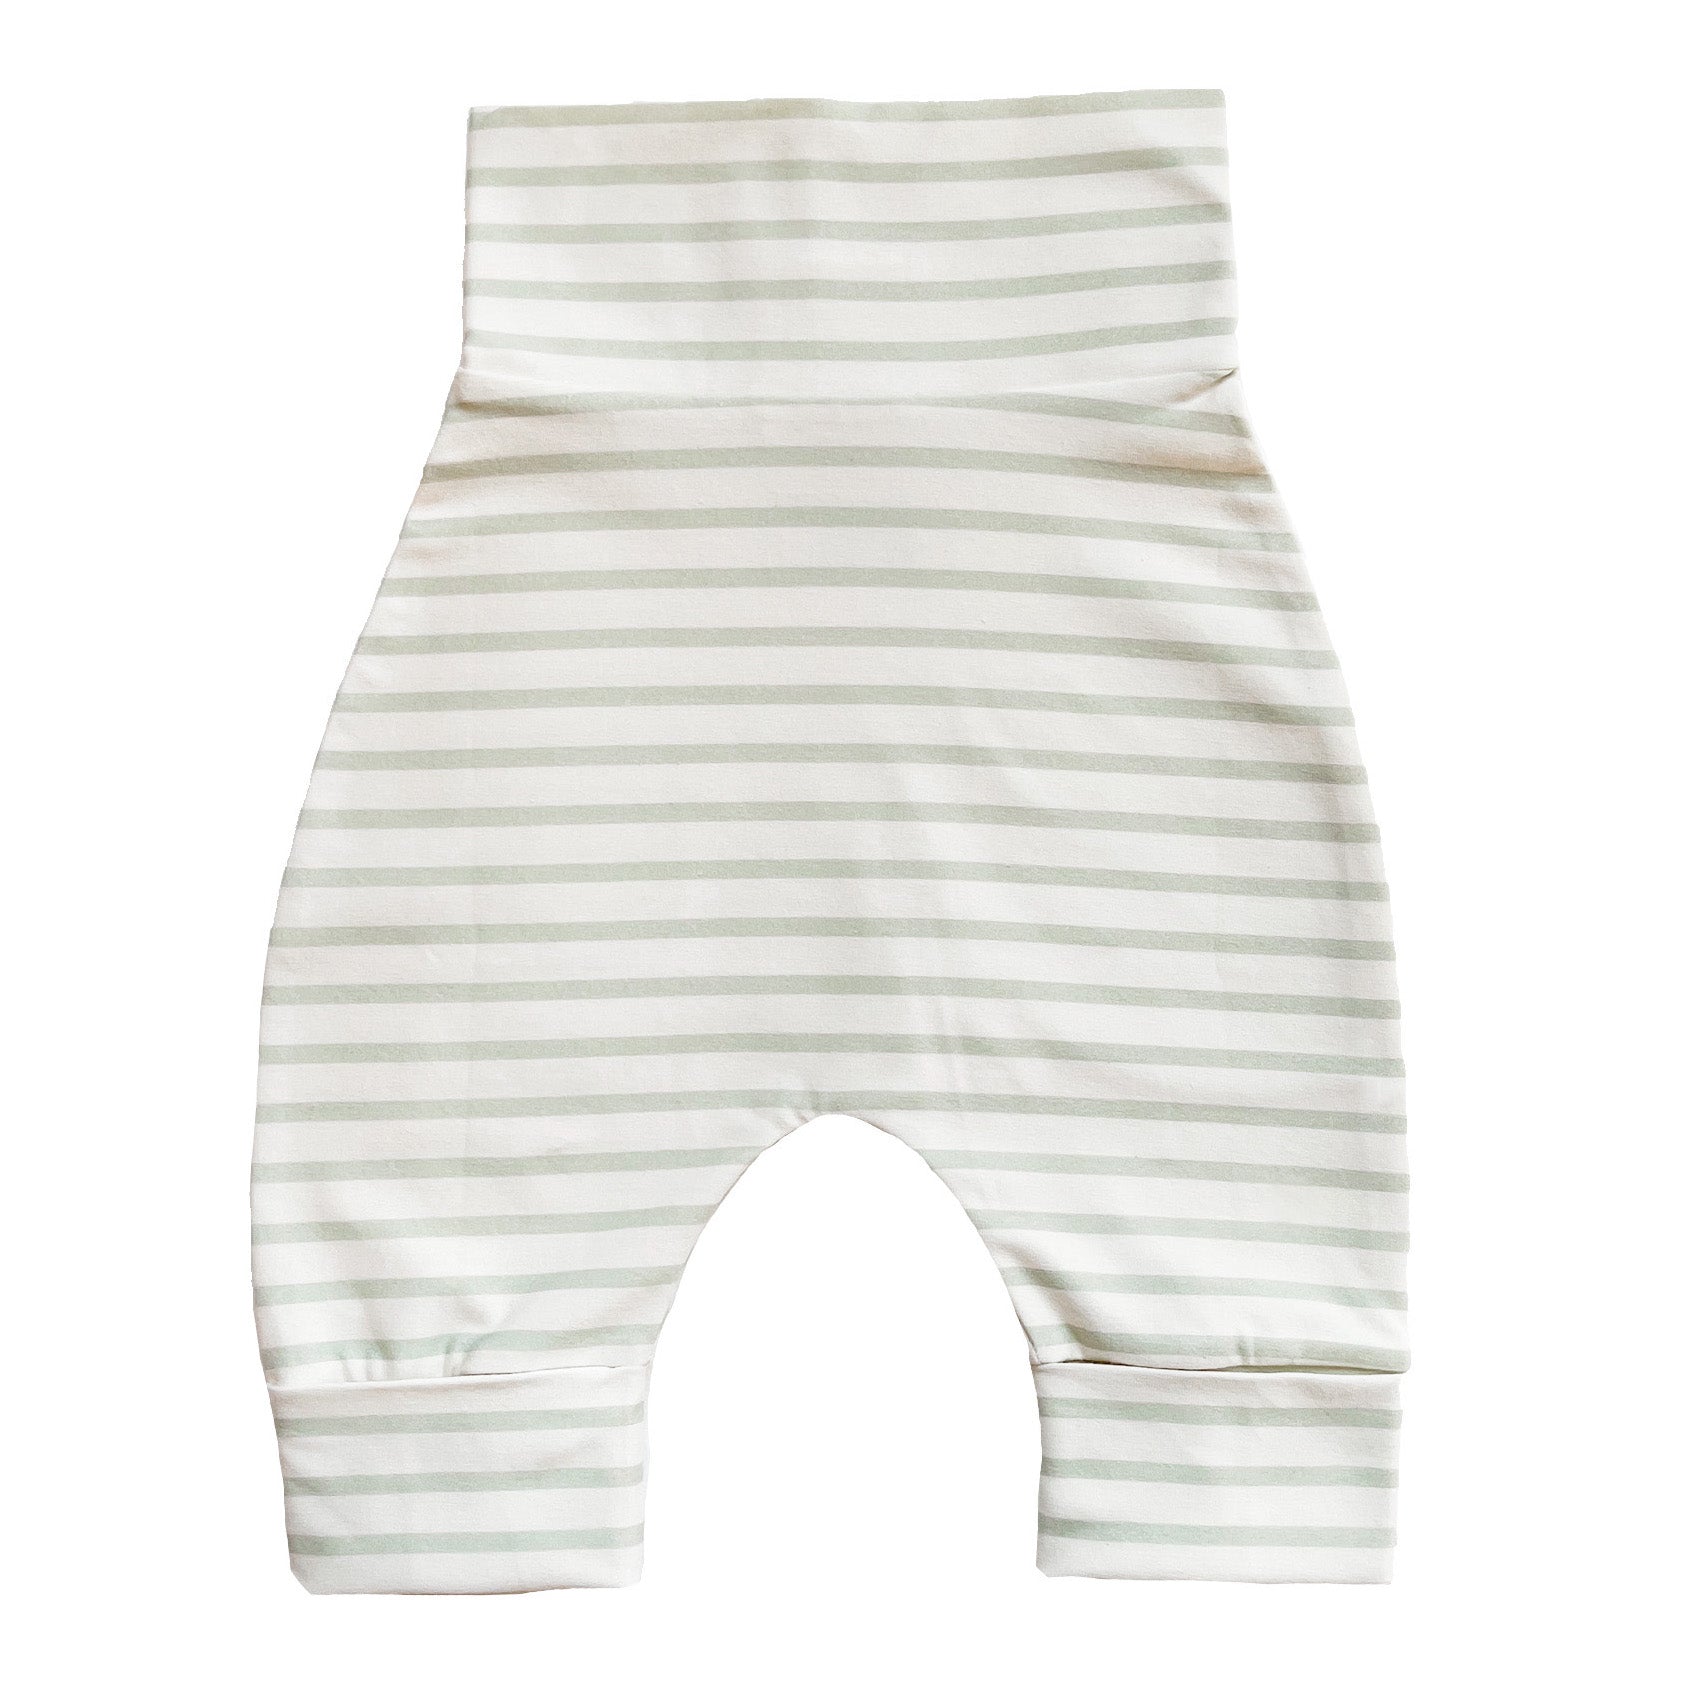 Grow with me babies and children Pants - Striped